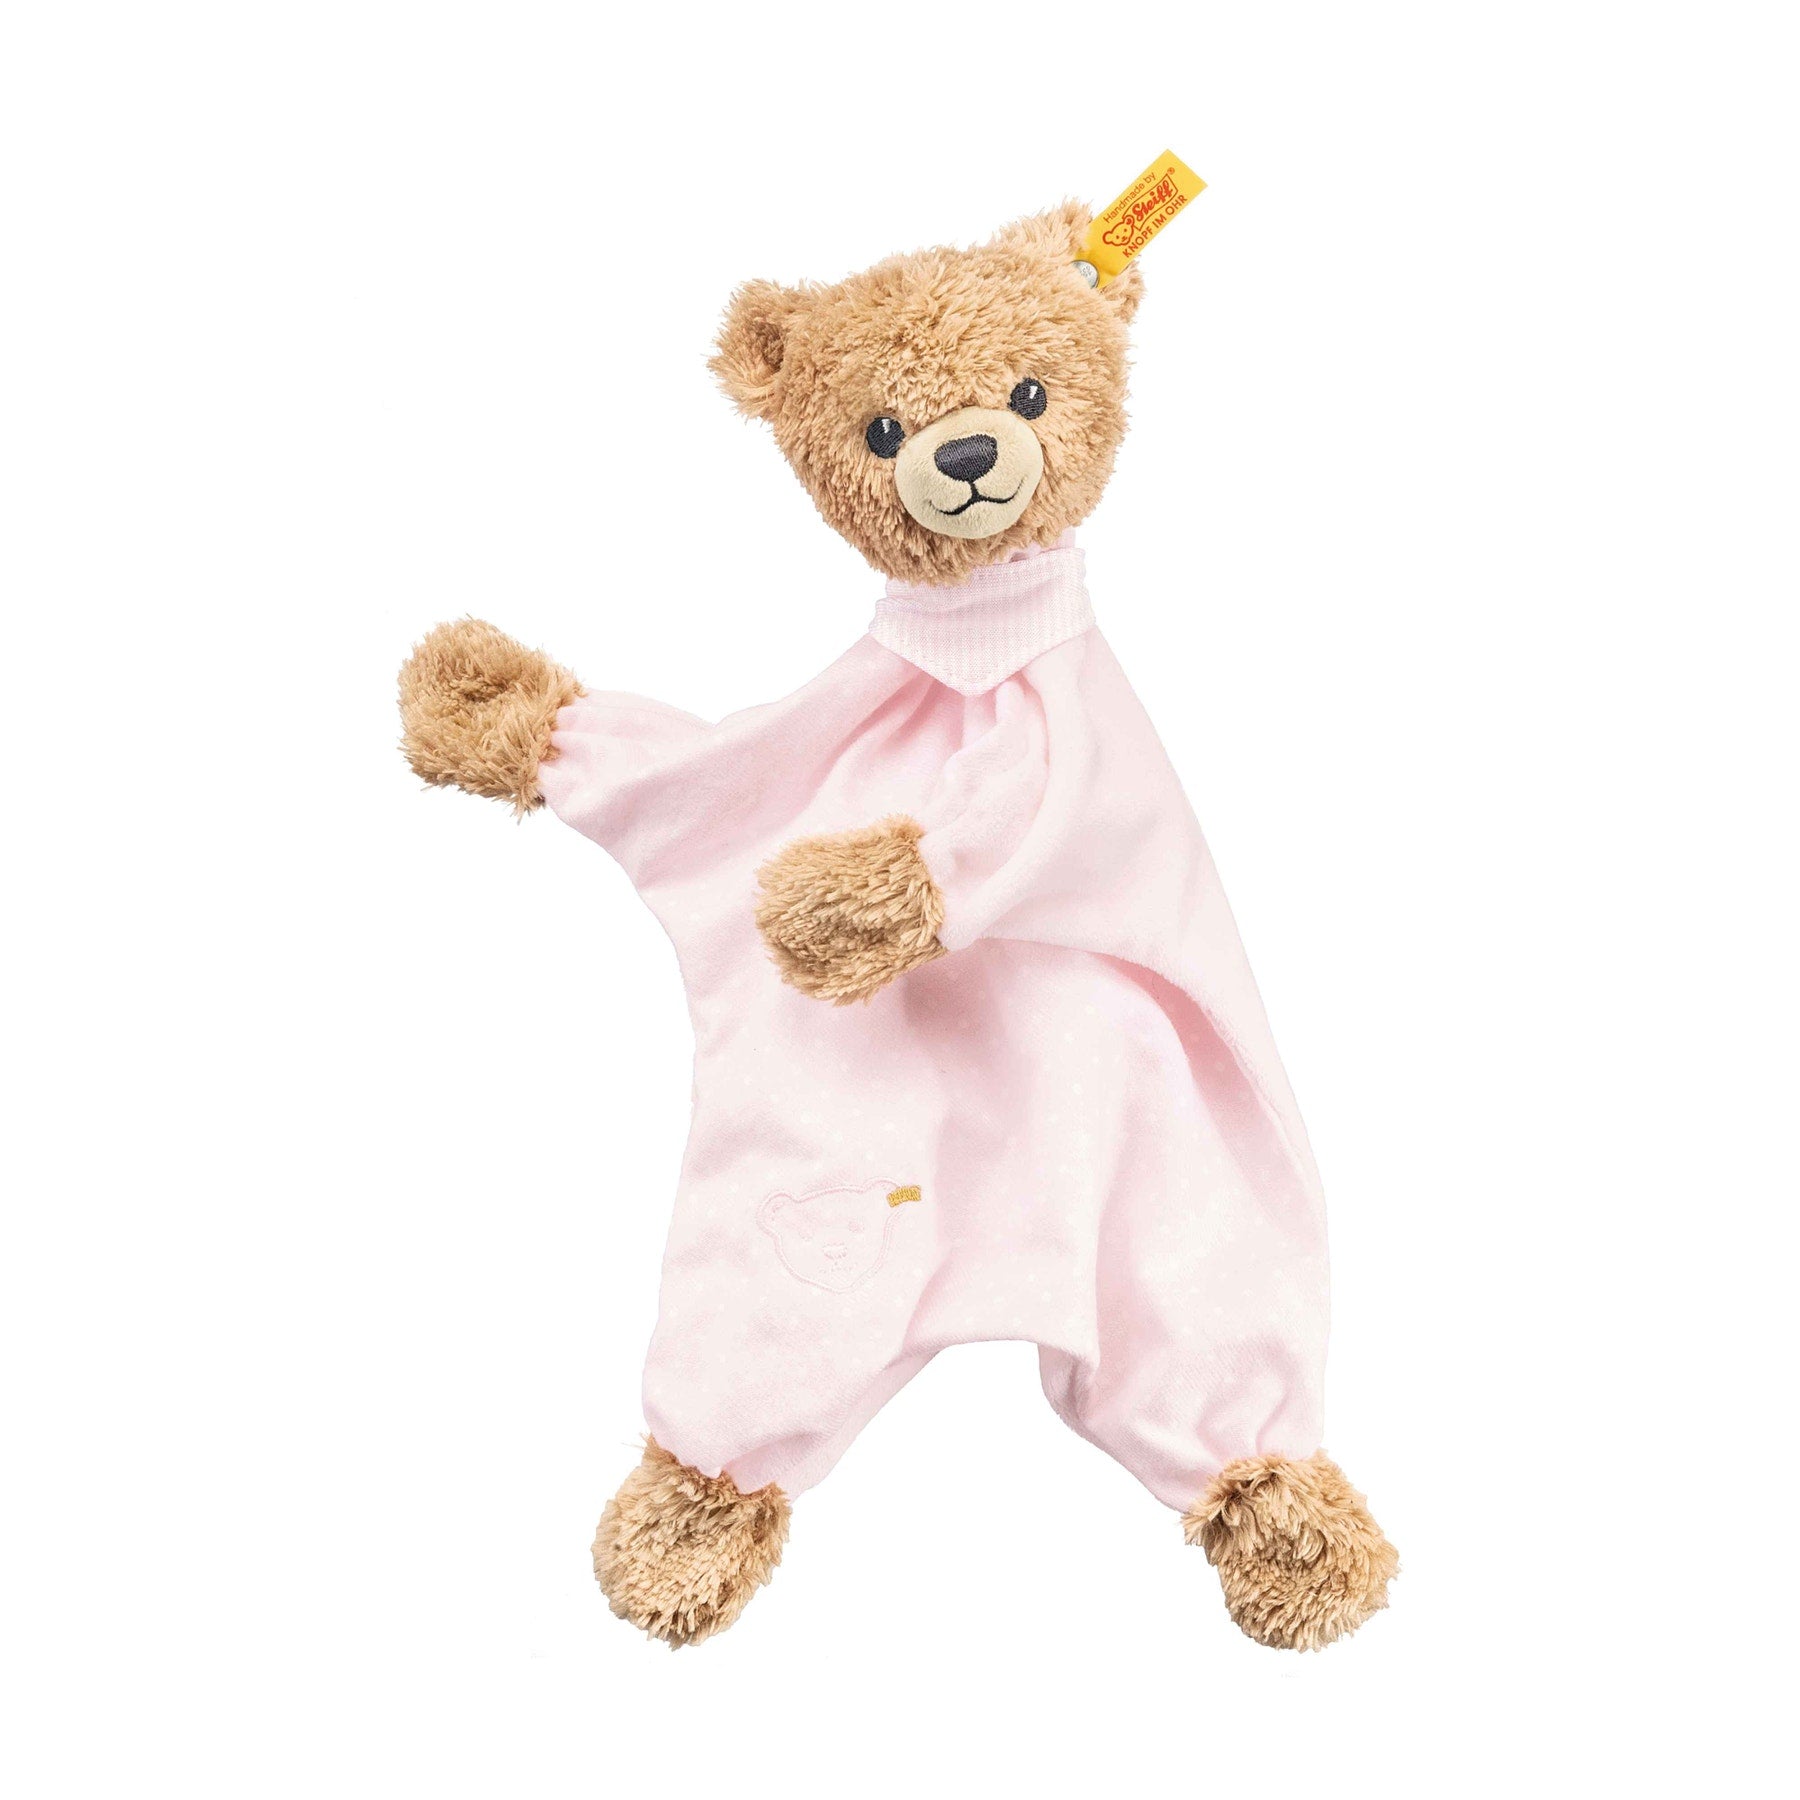 The Steiff Sleep Well Pink Bear Comforter is an indispensable companion for all newborn babies. The comforter absorbs the smells of home, giving baby a feeling of security